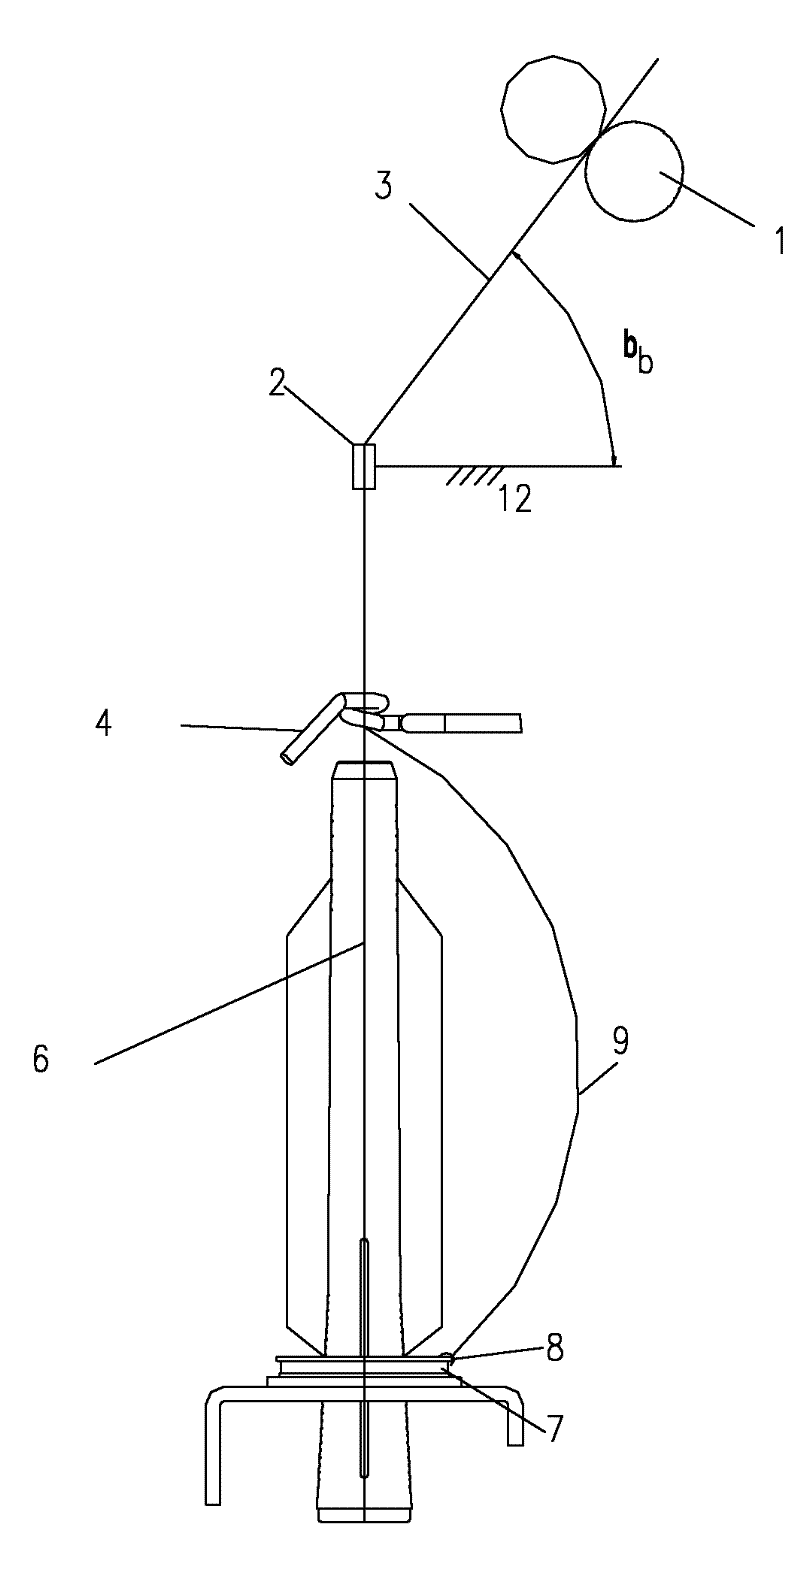 A spinning device for producing low-twist yarn